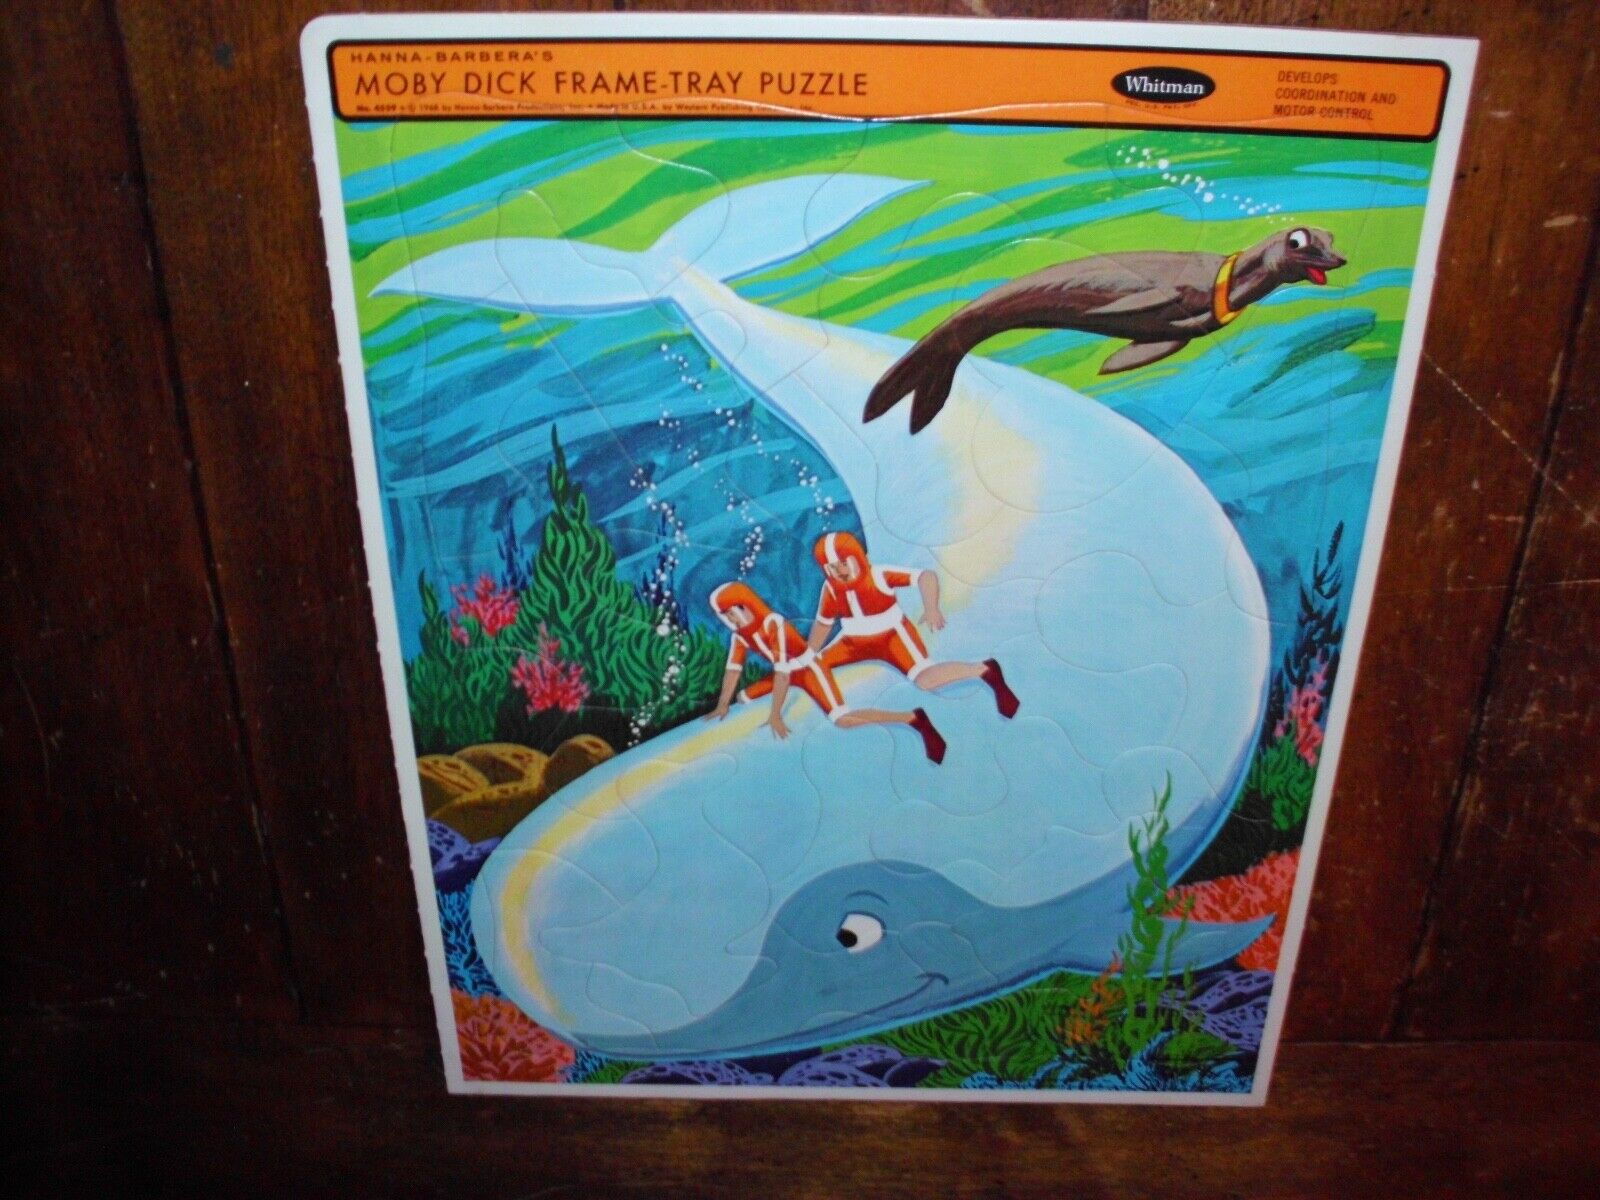 VINTAGE MOBY DICK FRAME TRAY PUZZLE WHITMAN RARE HUGE 1FT. BRAND NEW MINT 1968